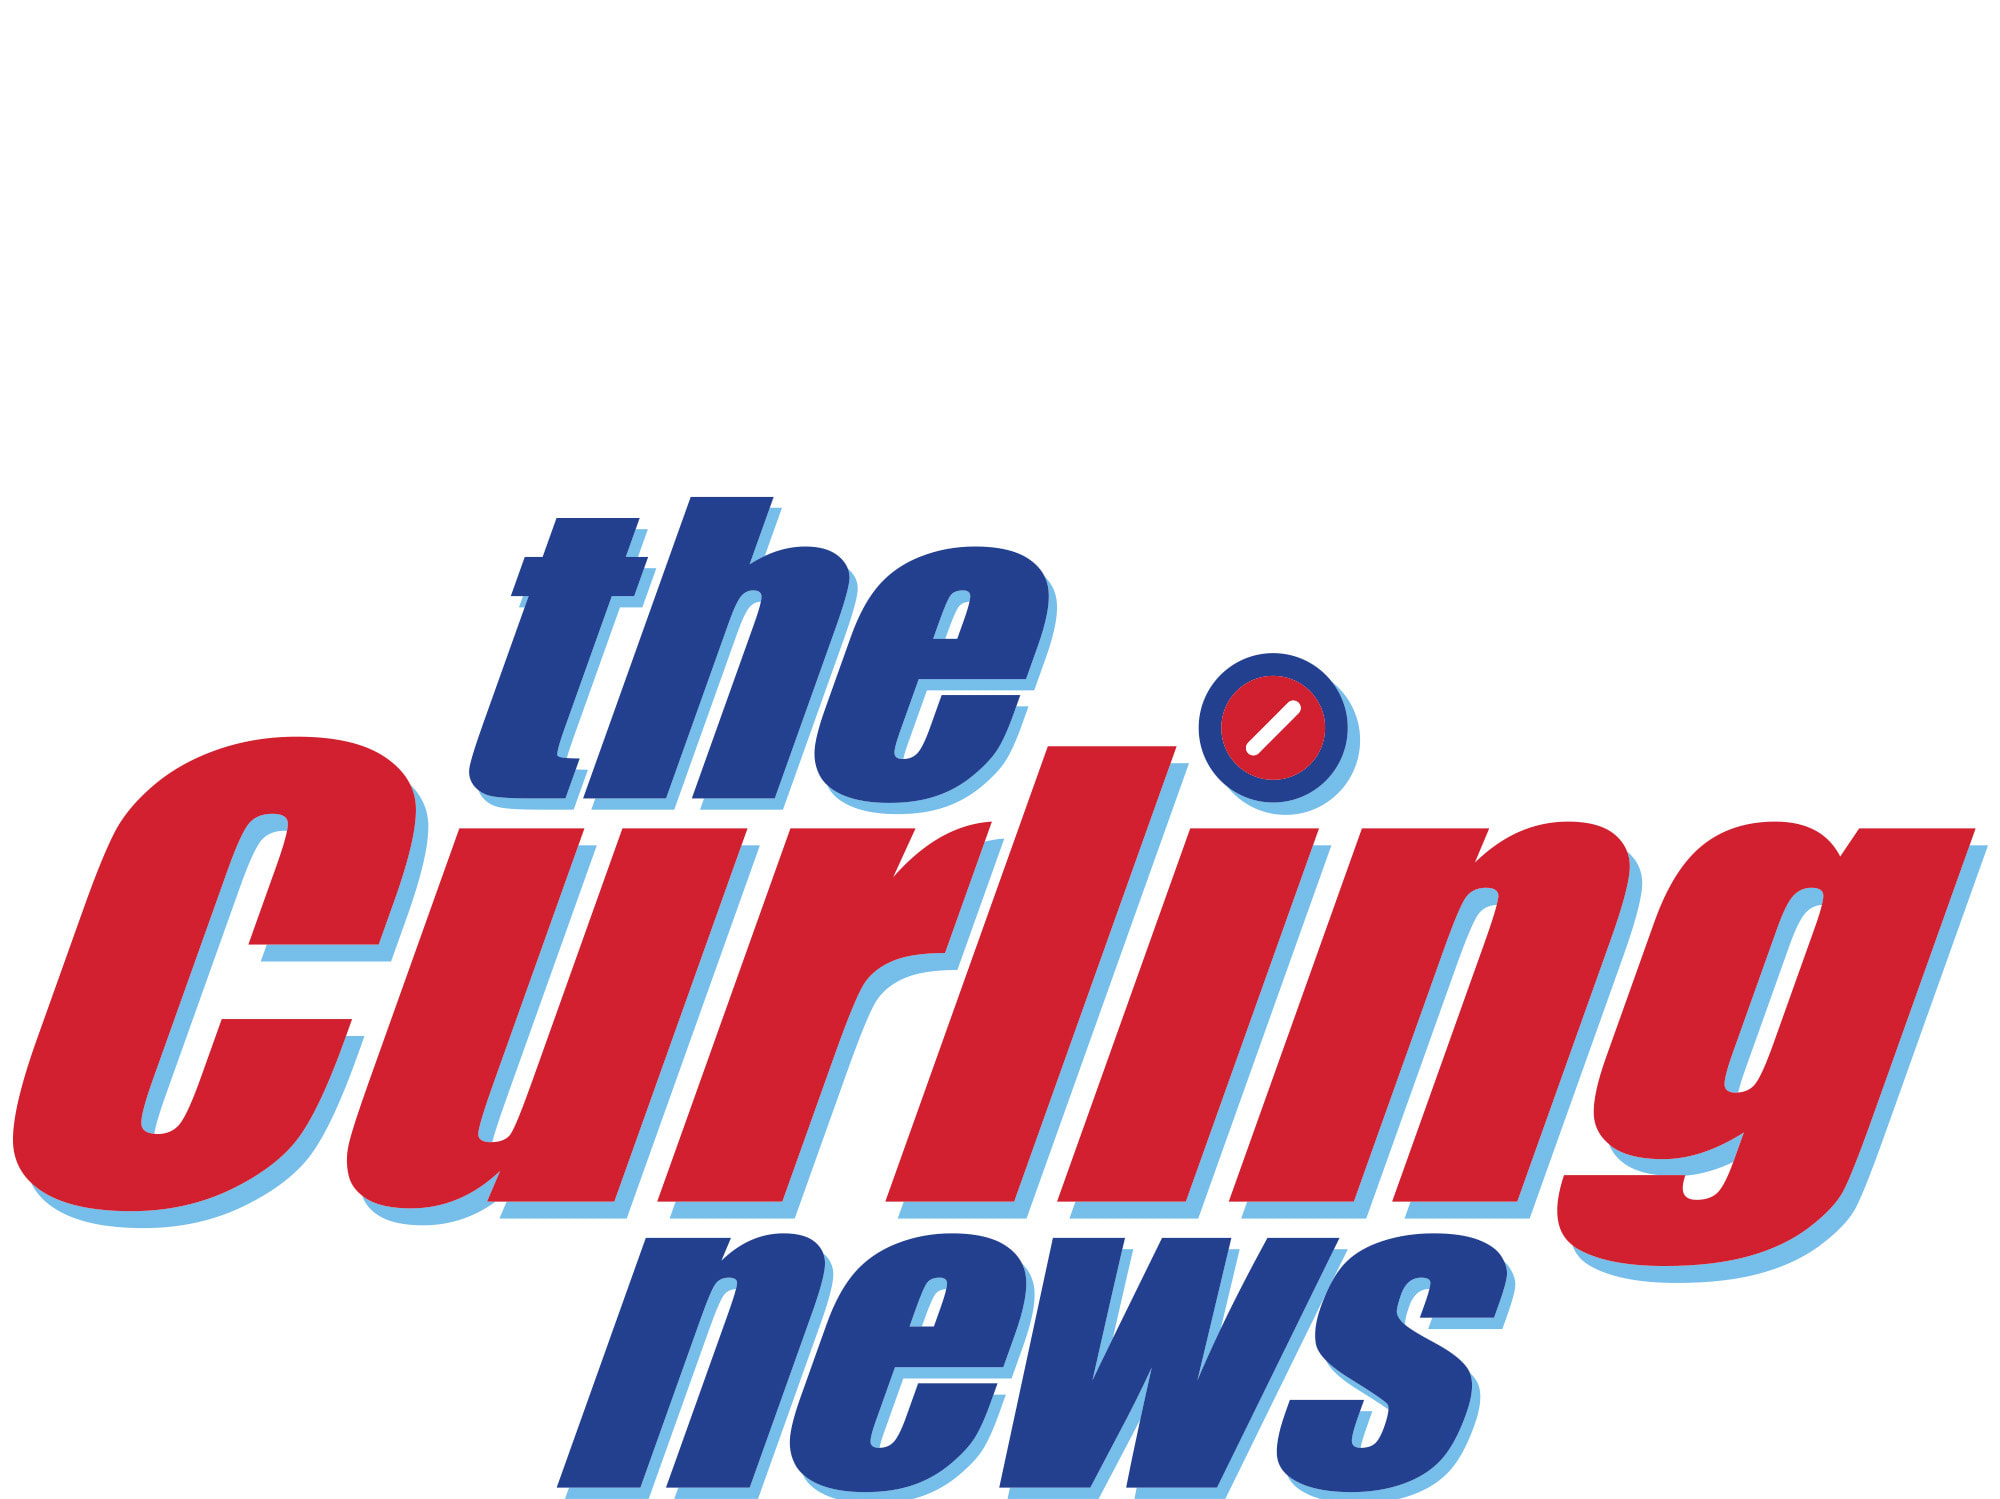 Live curling watching on the web